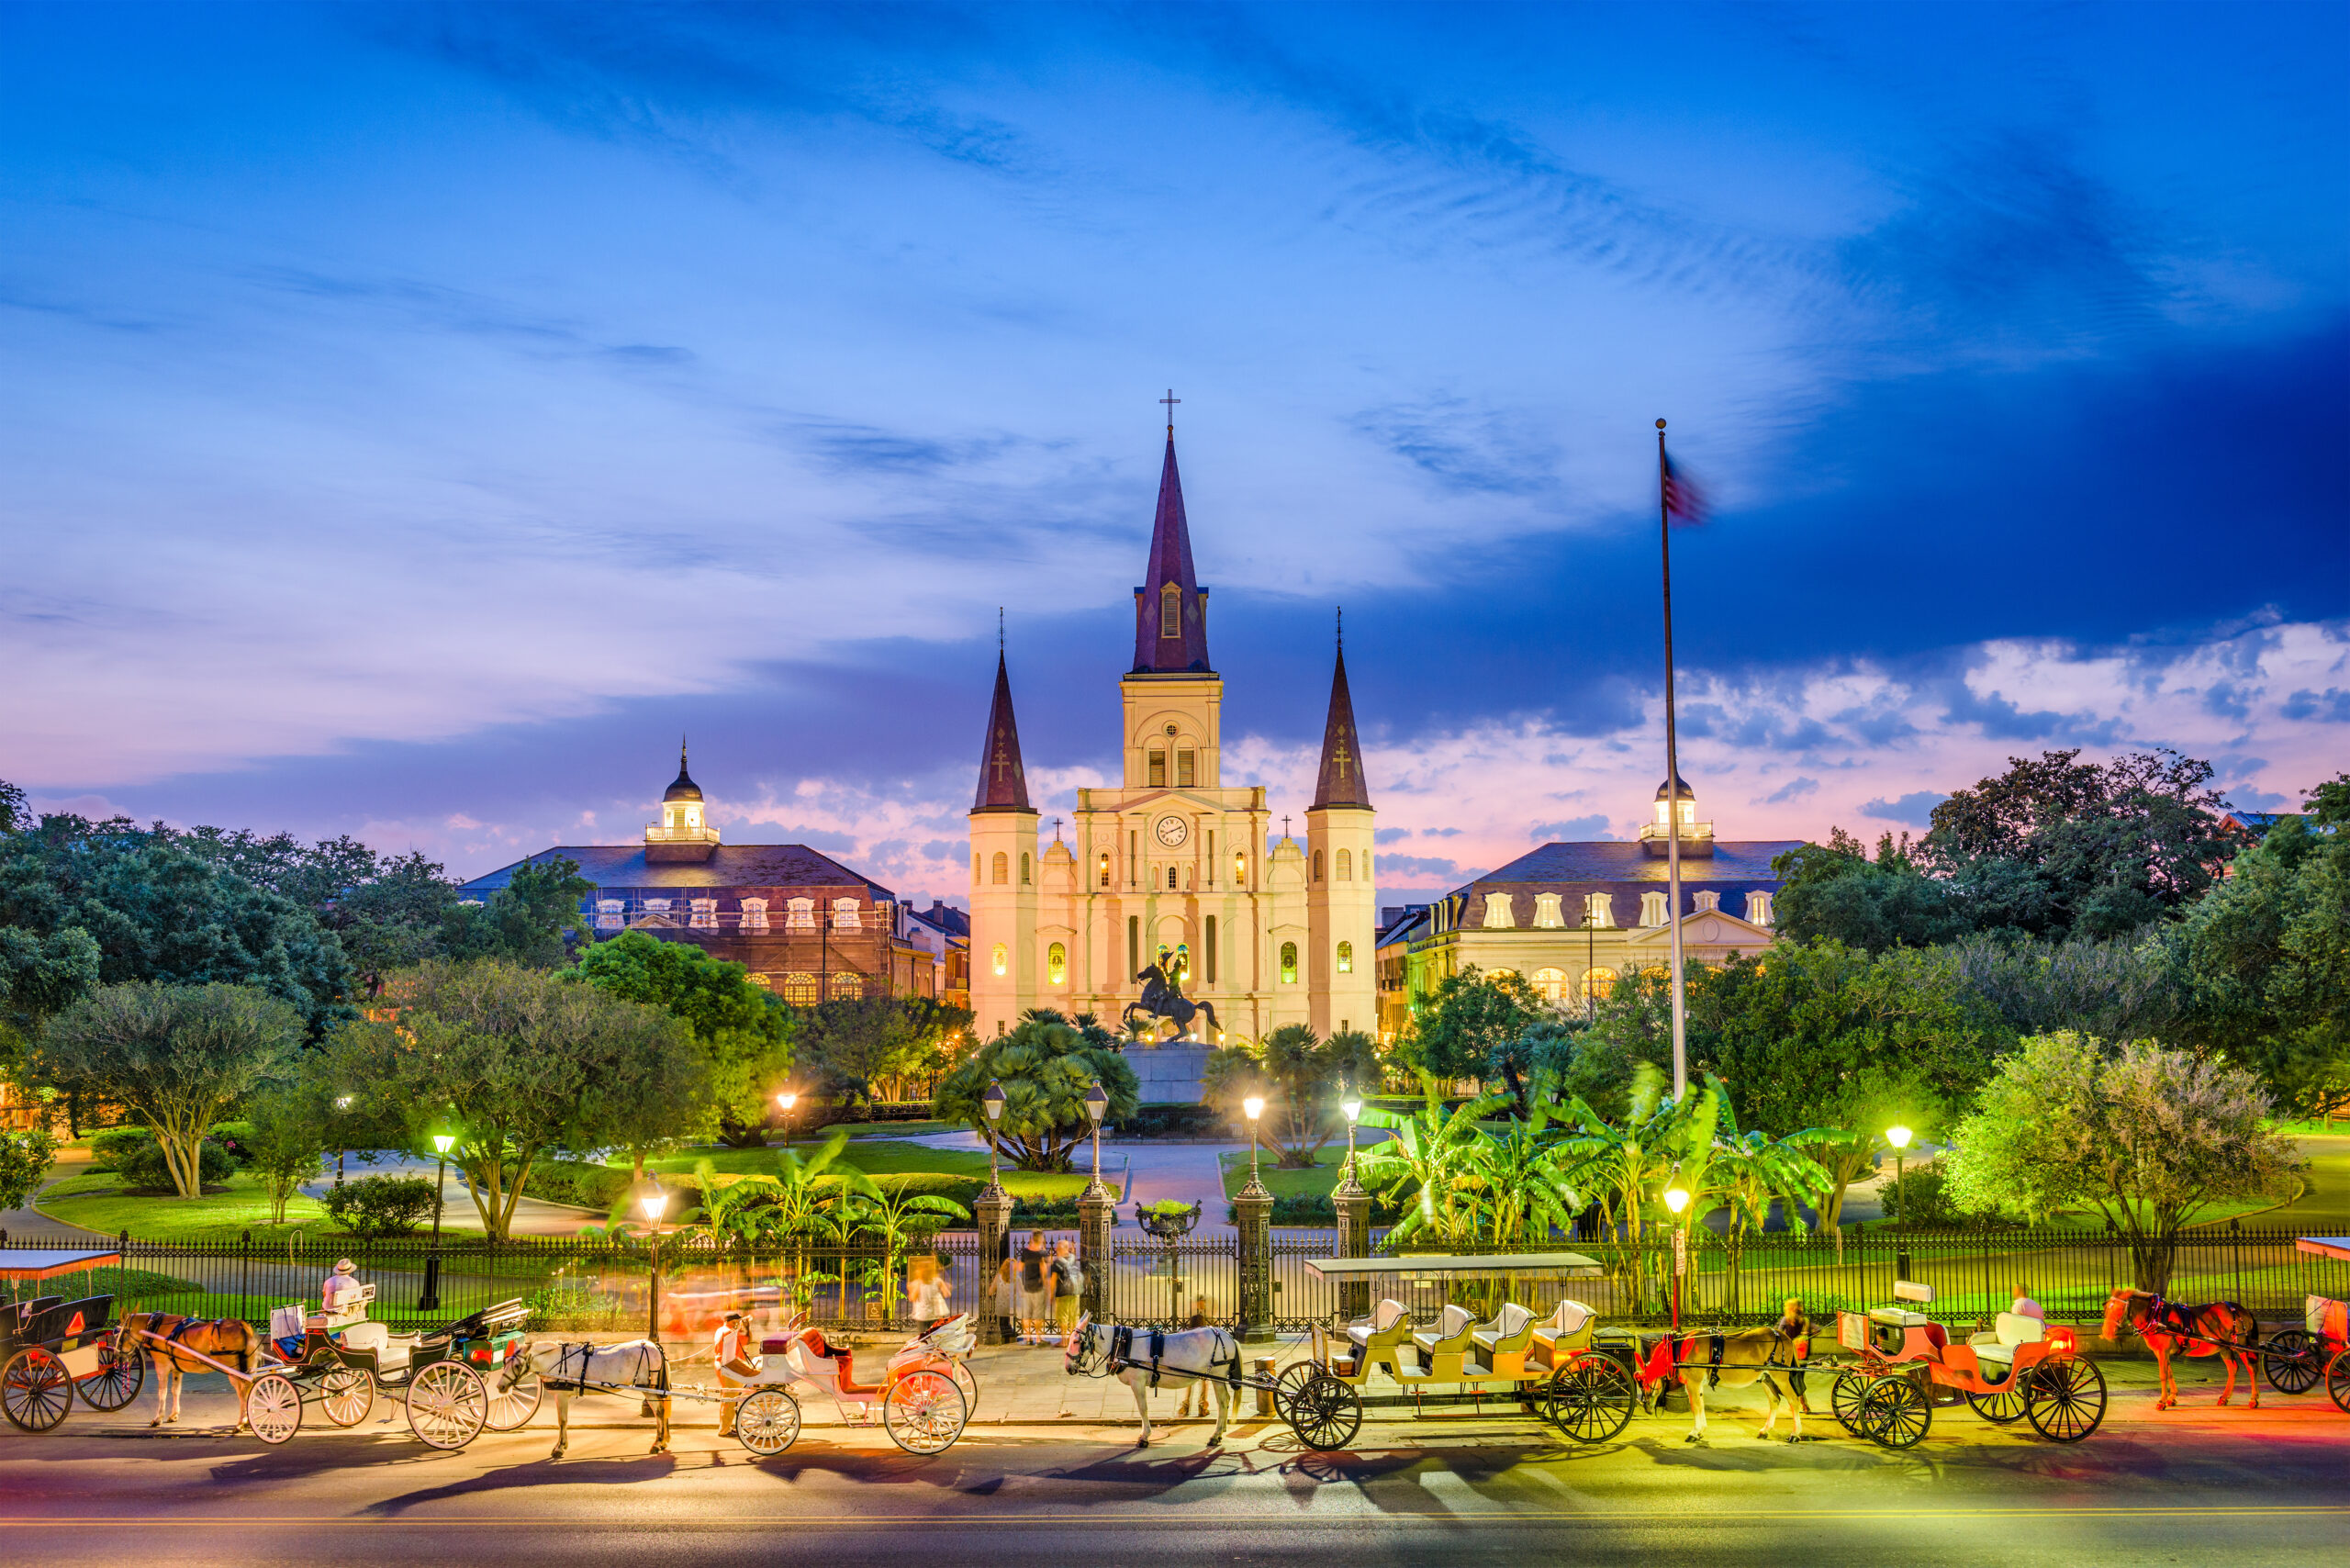 Jackson Square at the City of New Orleans